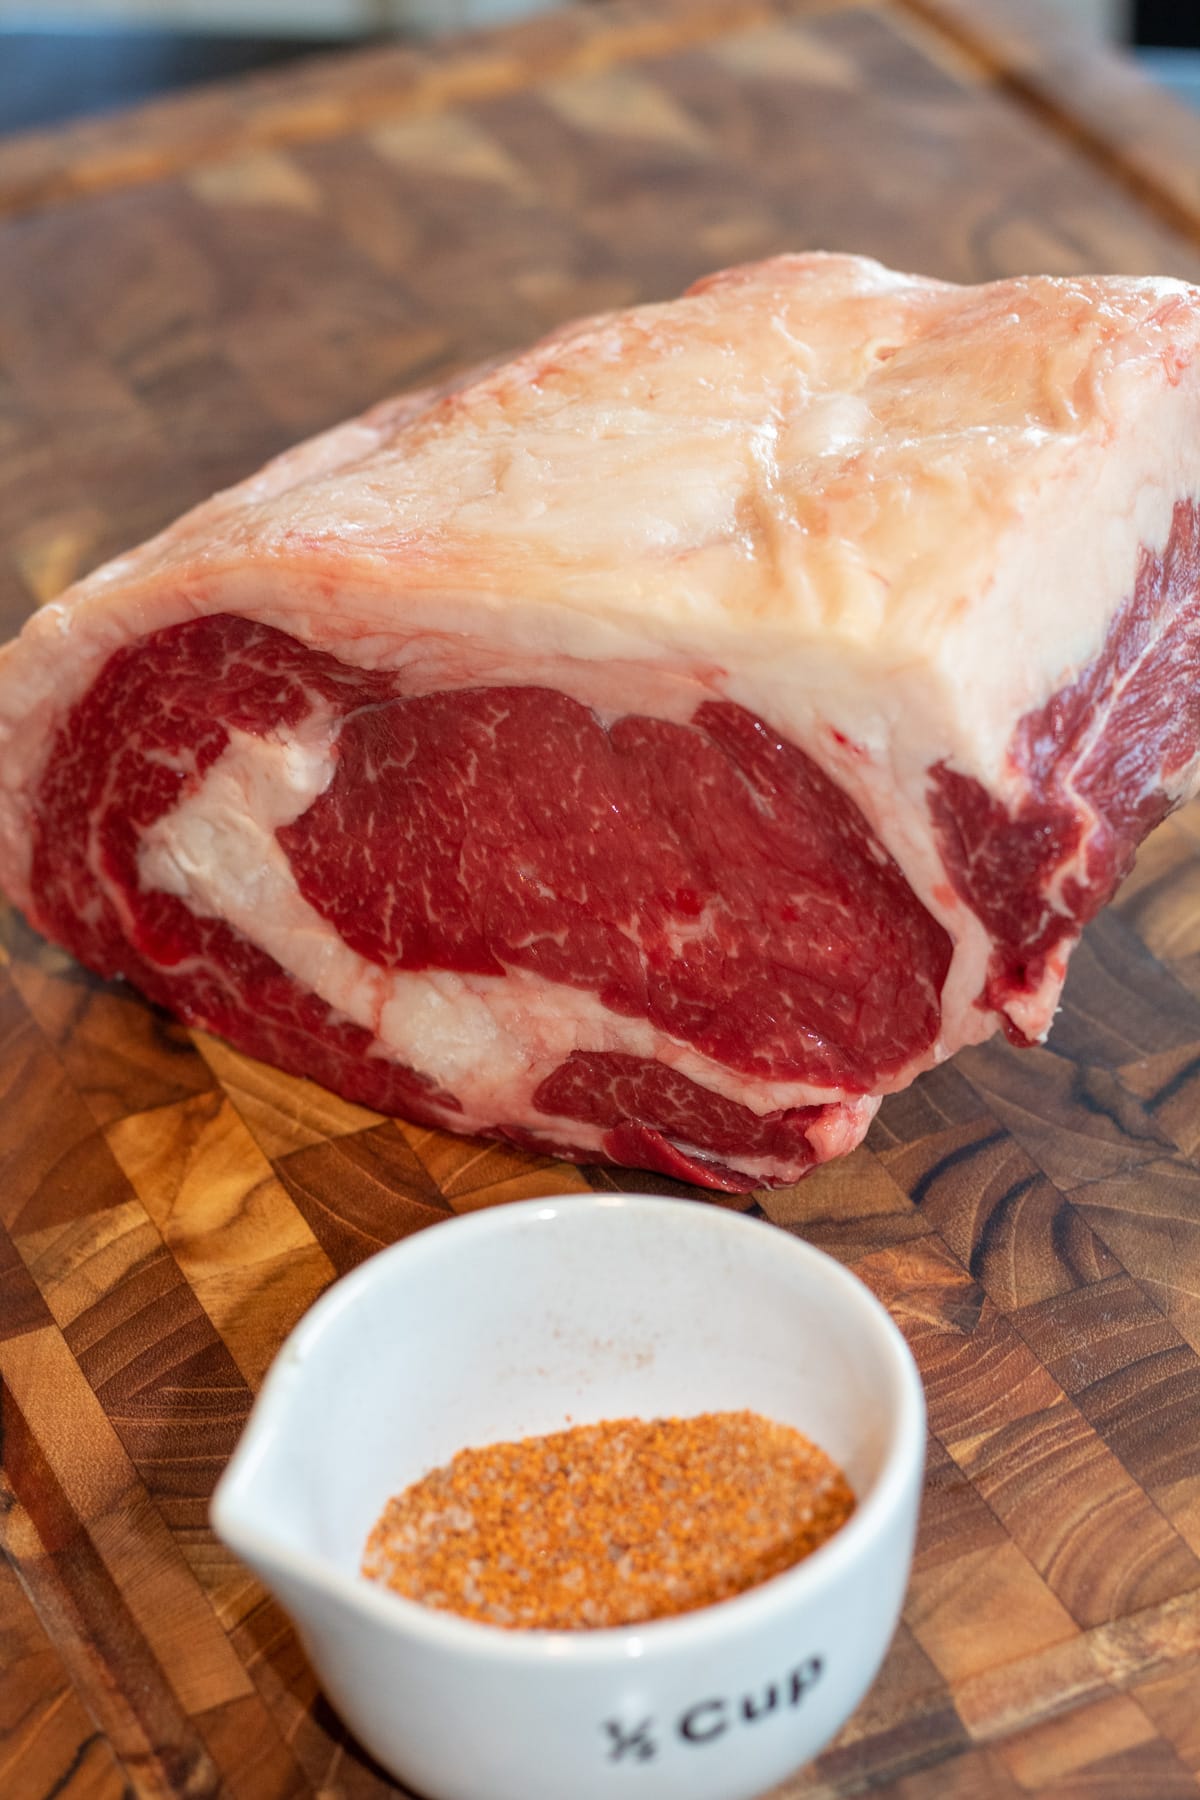 SMoked bison prime rib recipe ingredients including a beautiful cut of aged buffalo and seasoning.